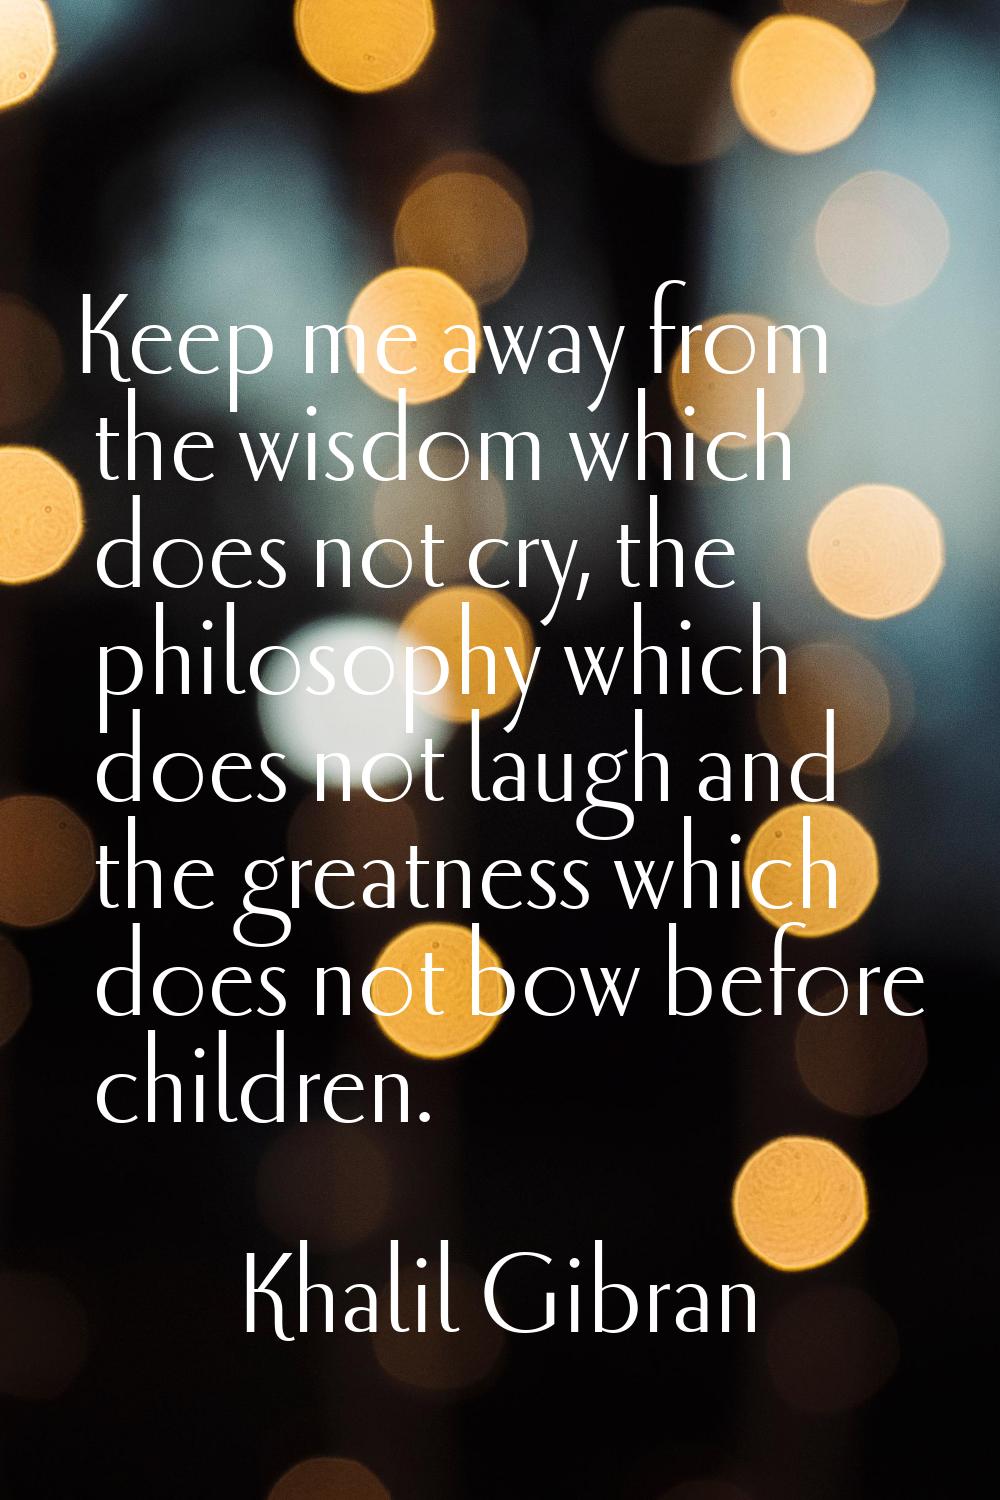 Keep me away from the wisdom which does not cry, the philosophy which does not laugh and the greatn